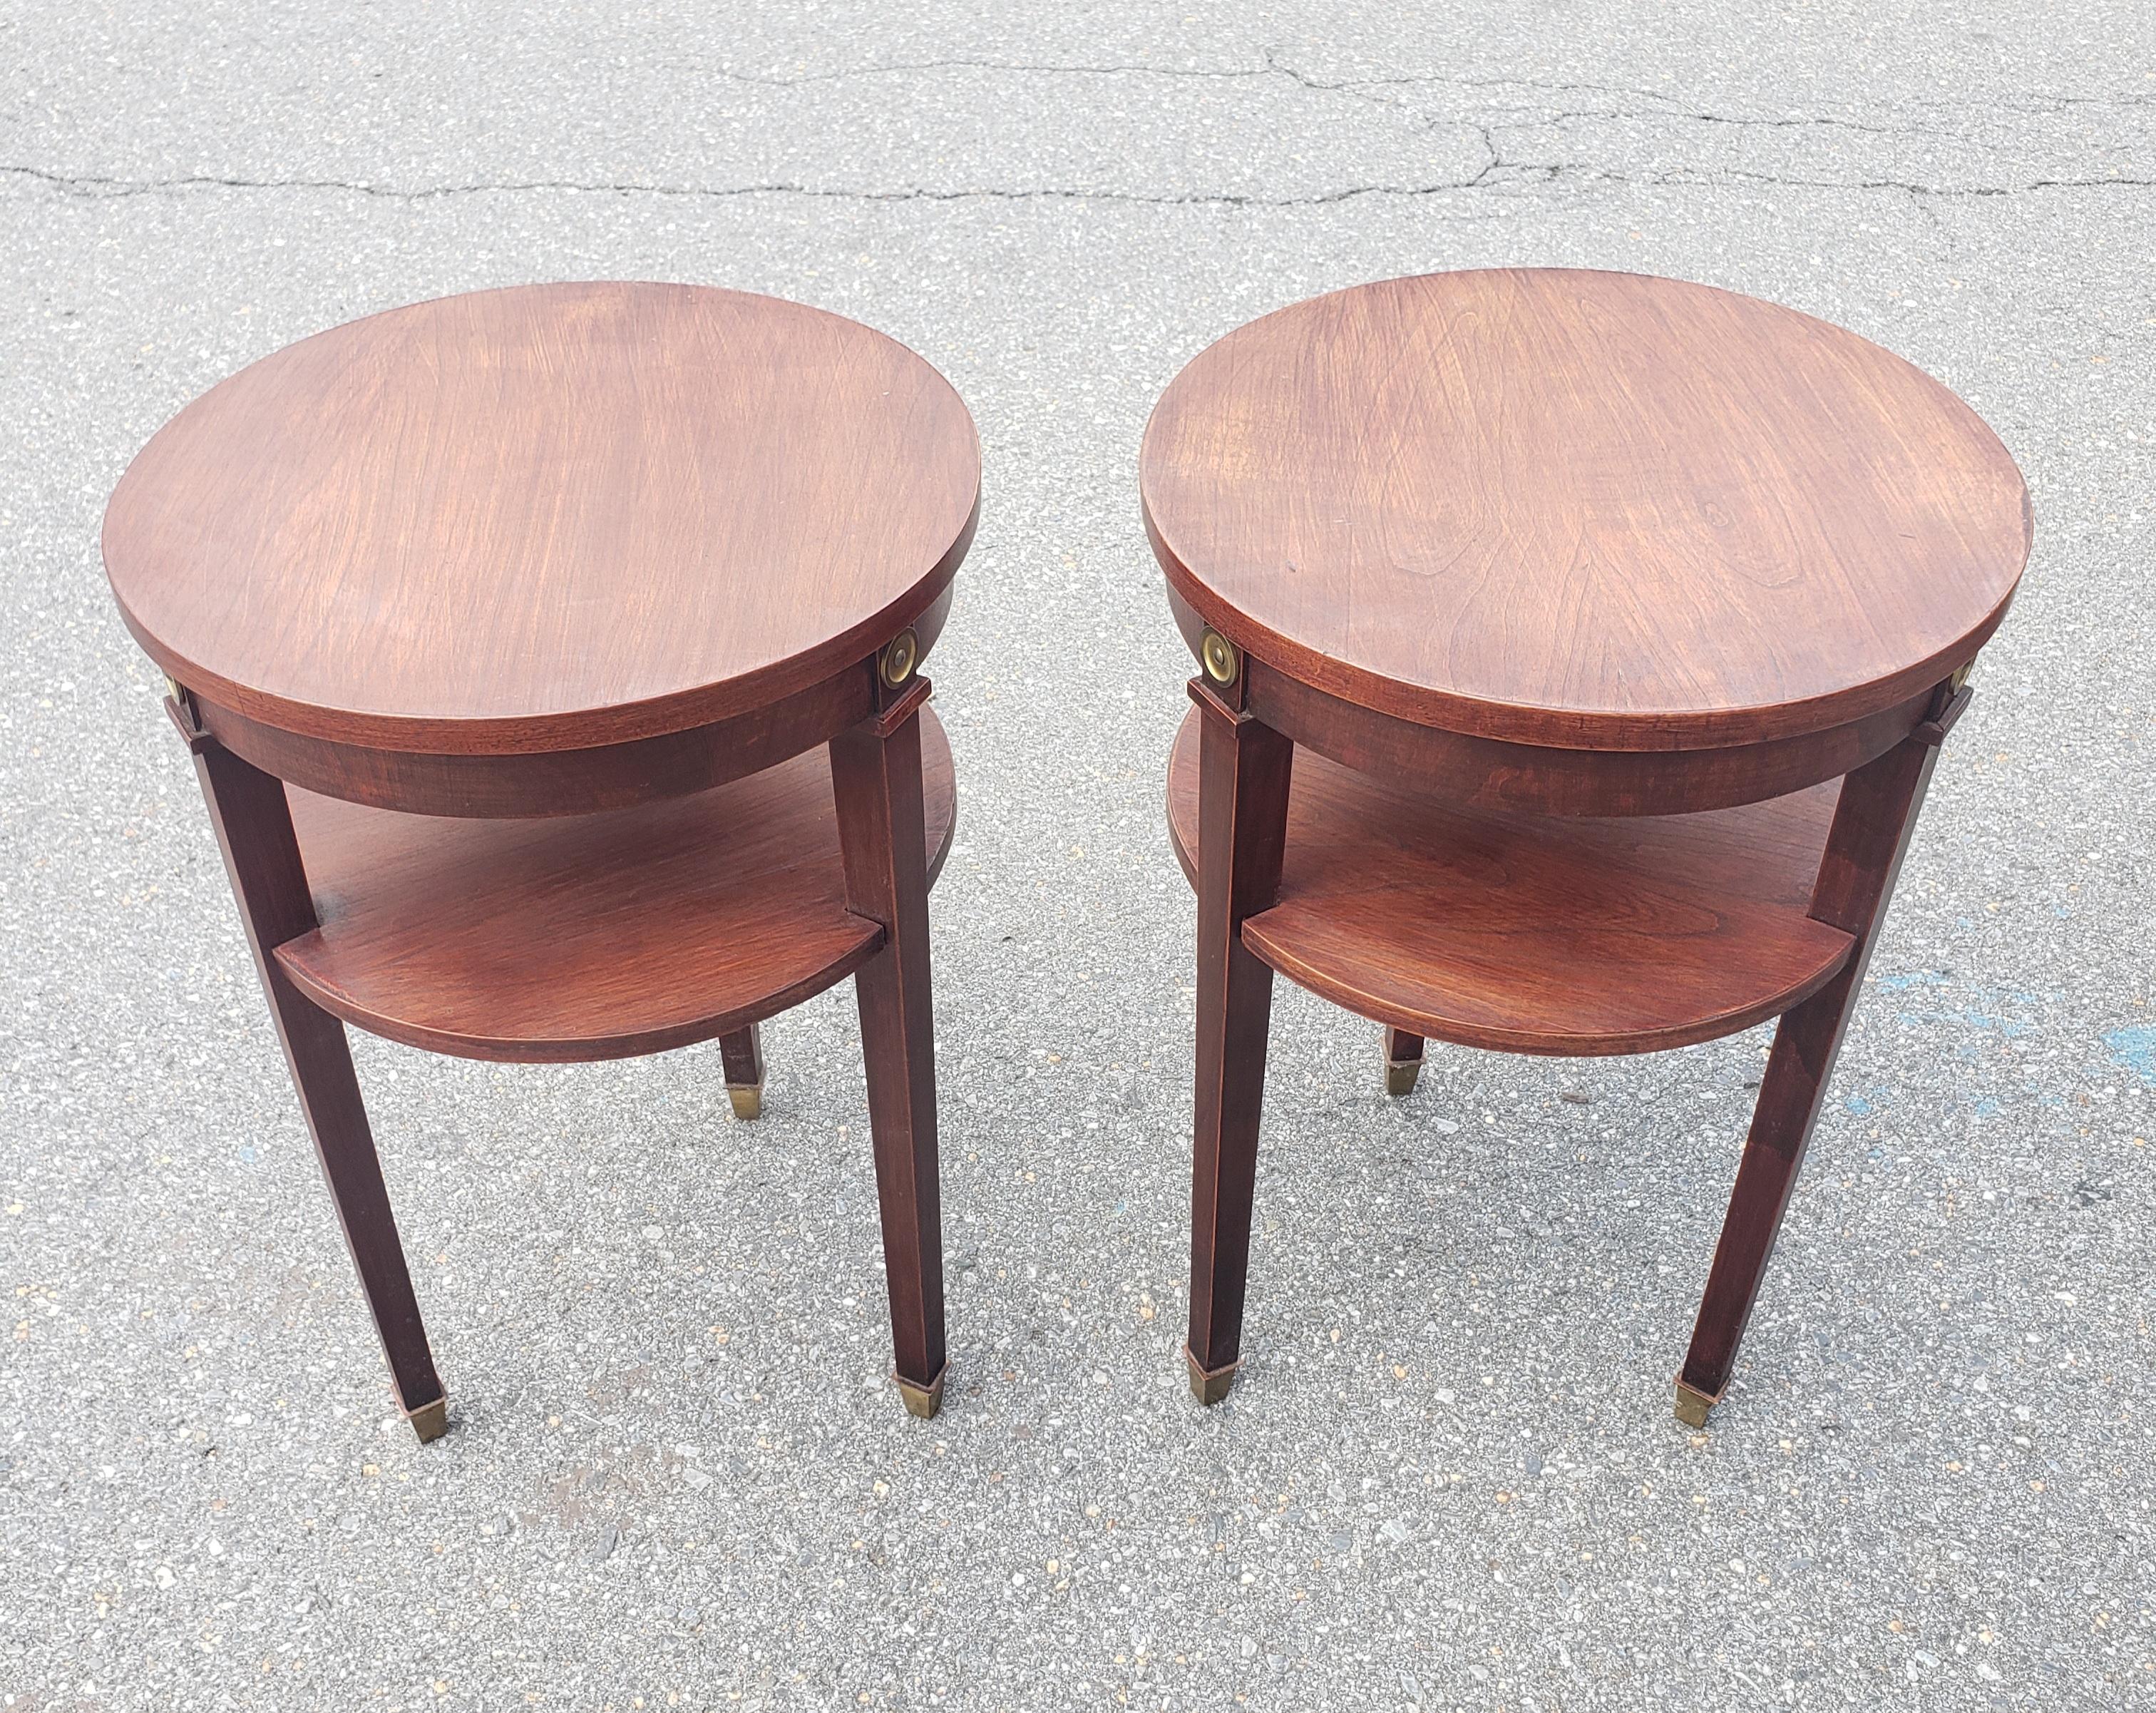 American 1950s Refinished Mahogany 2-Tier Round Candle Stand with Brass Capped Legs, Pair For Sale